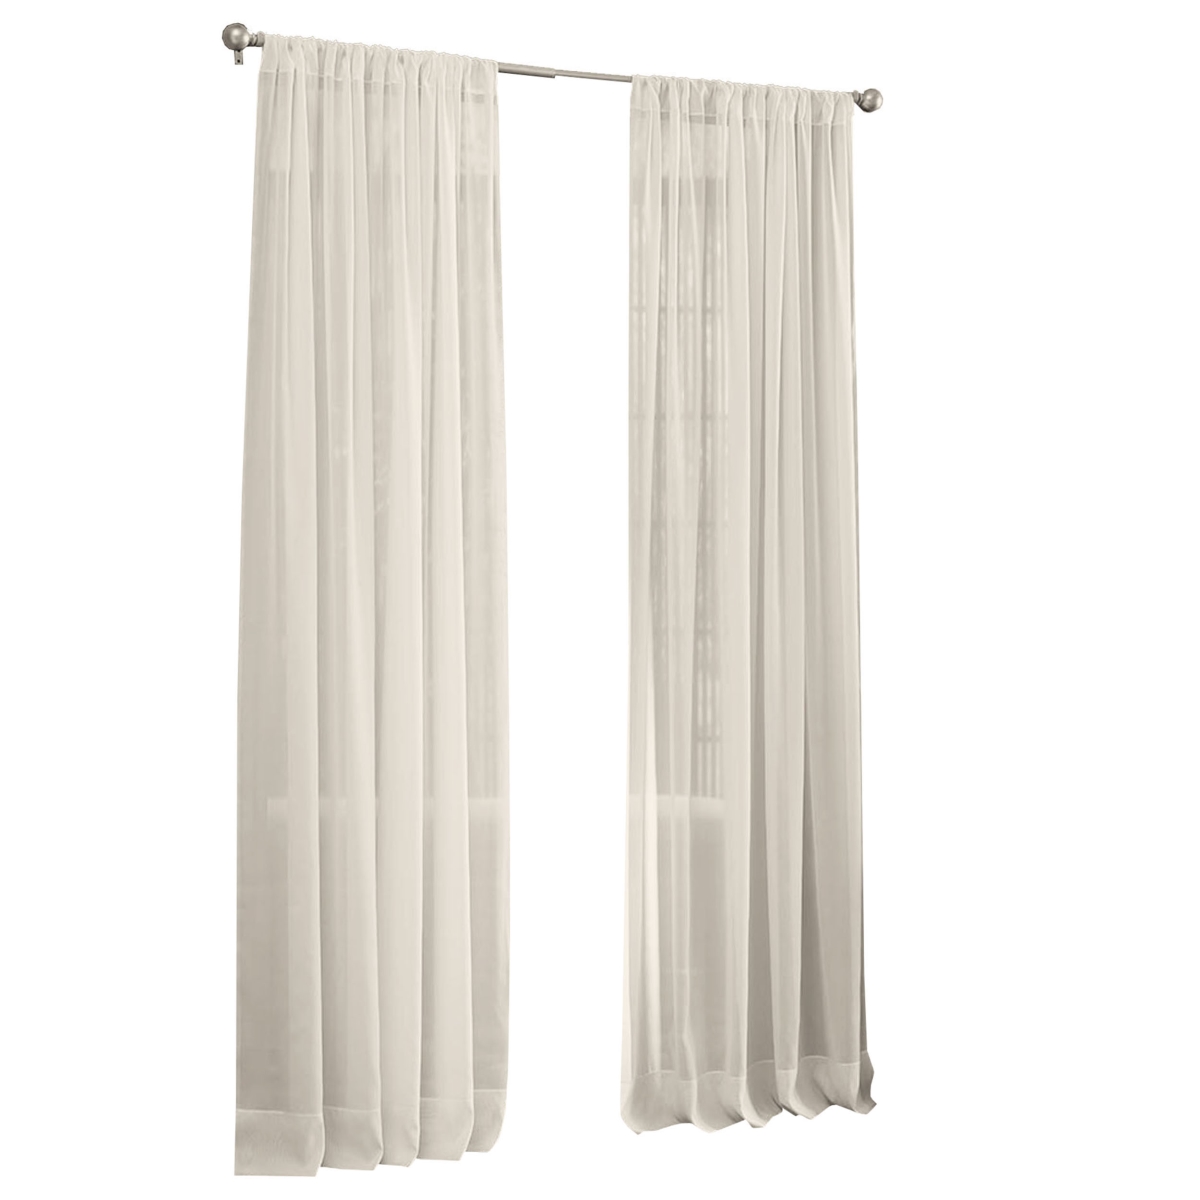 Voiledrap-118x120-ivory Sheer Voile Drape Panel, Ivory - 118 X 120 In.